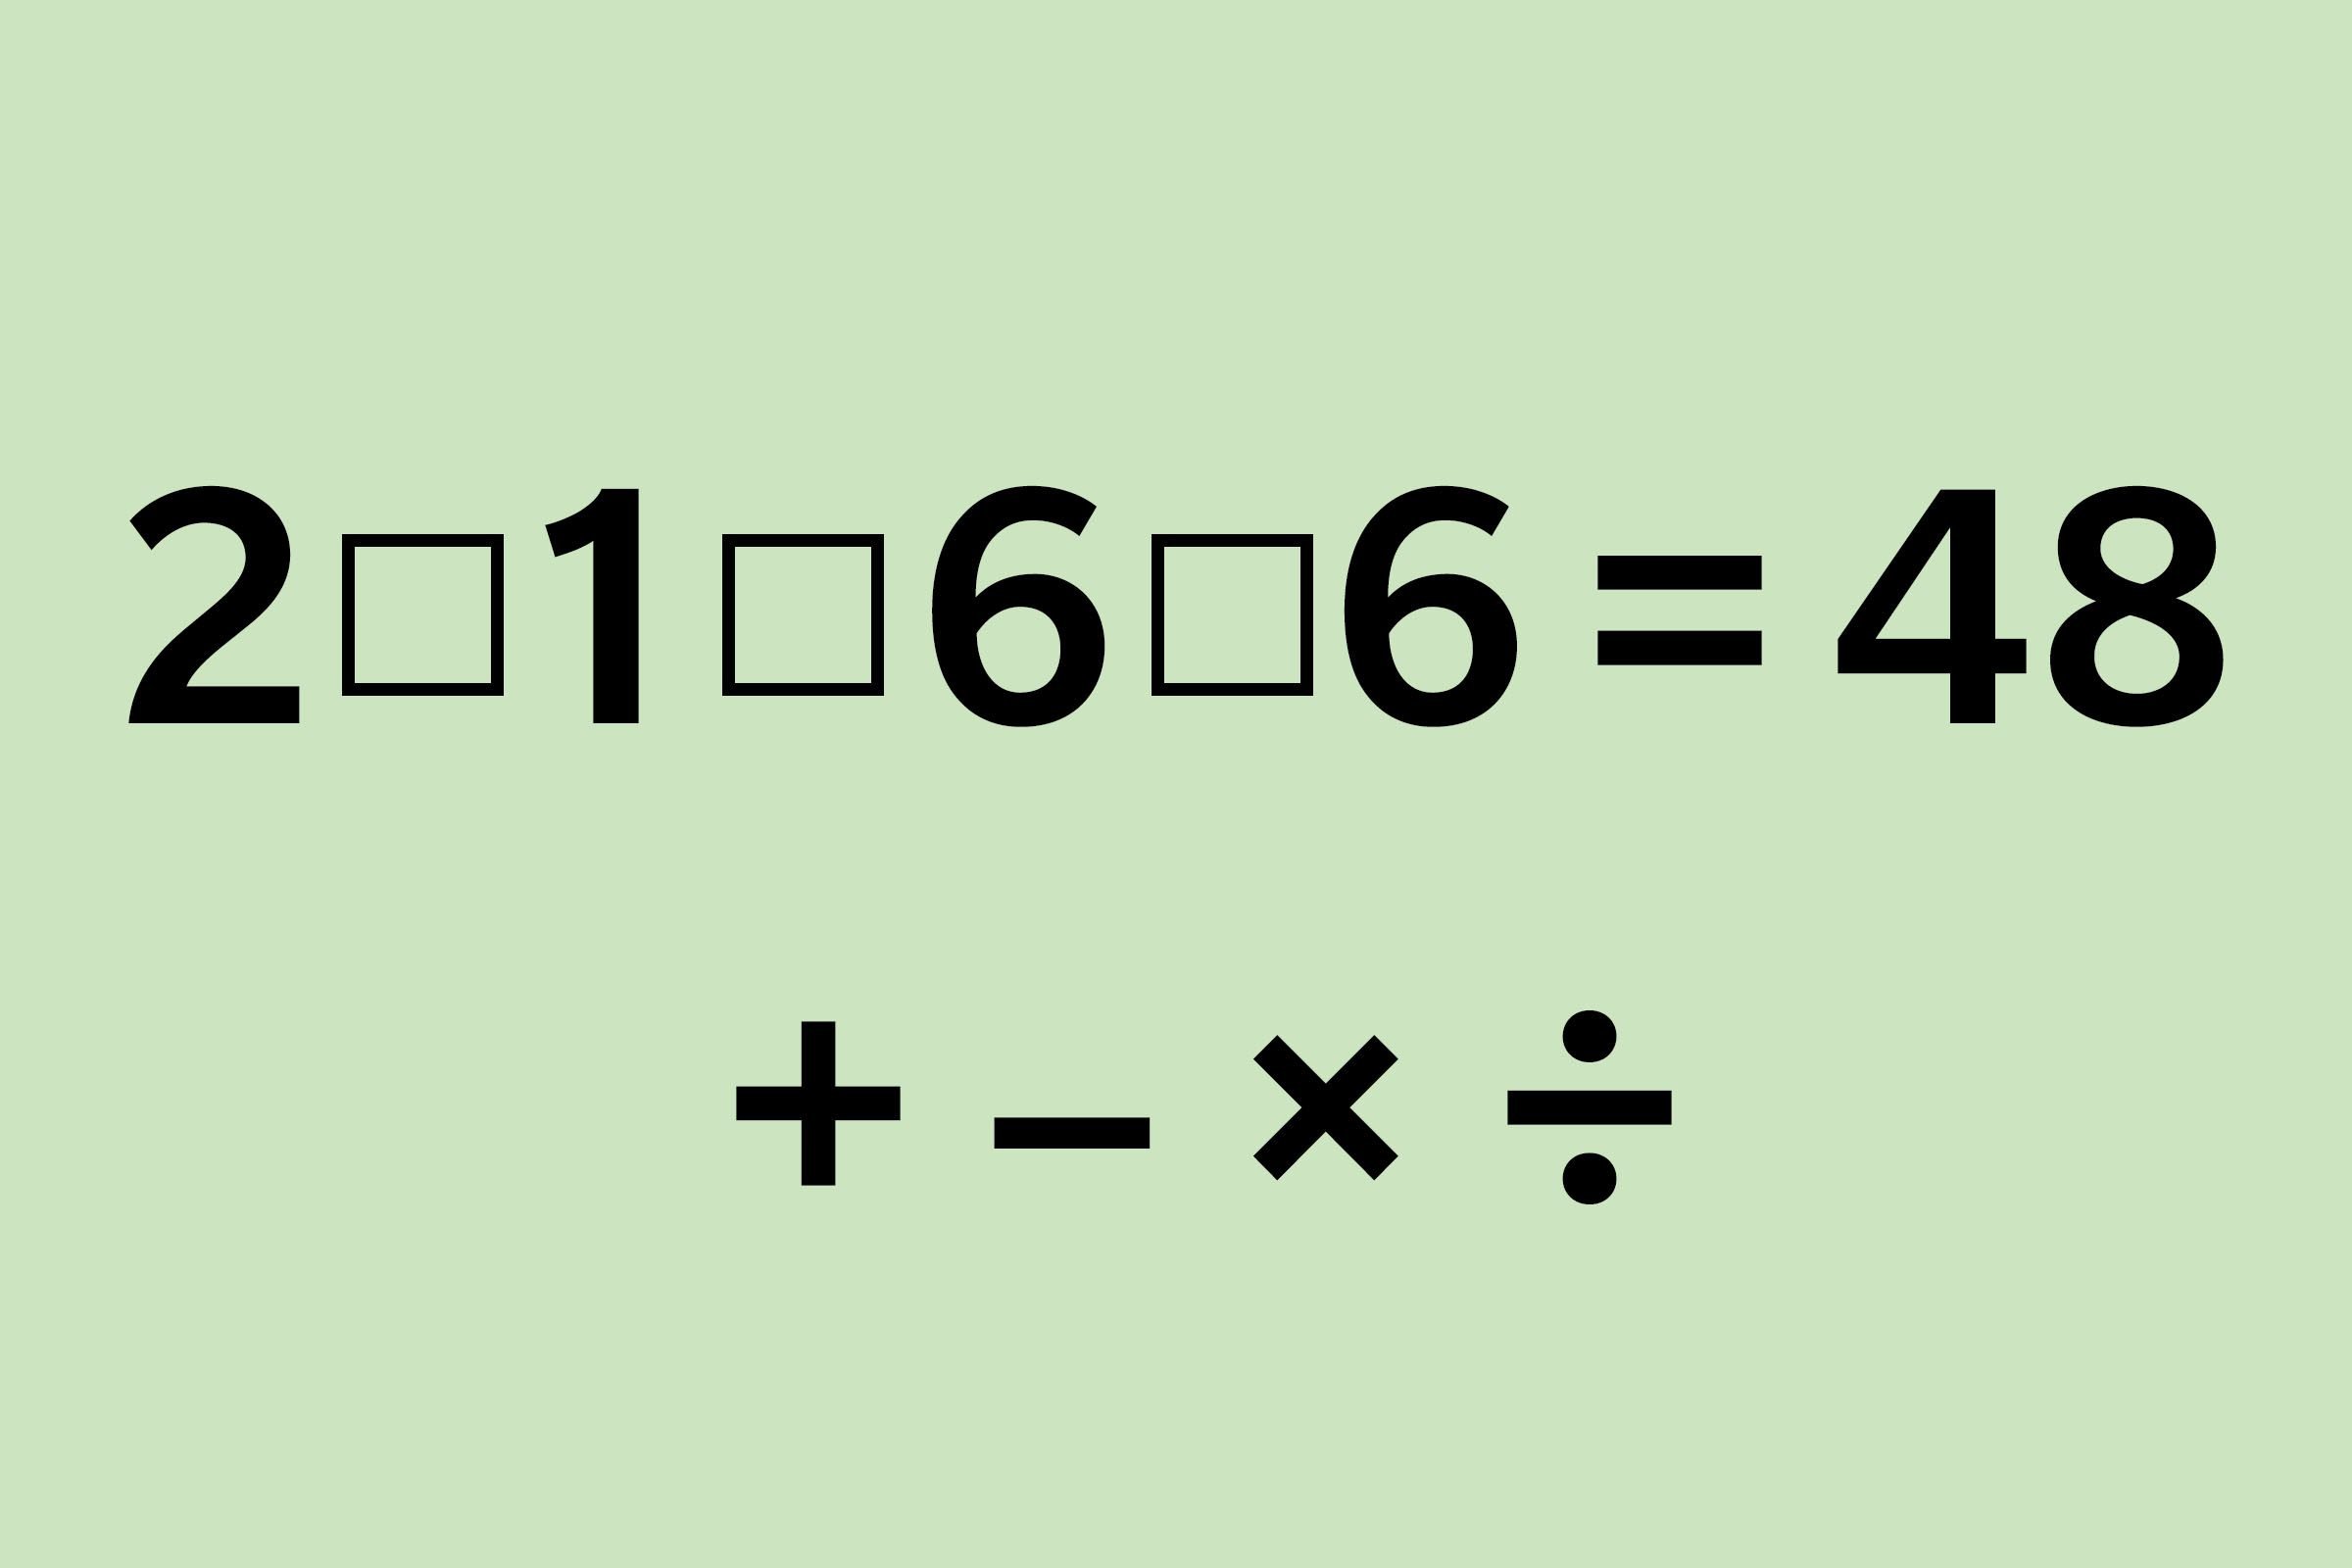 Brain teaser: Only geniuses can solve this puzzle in 10 seconds